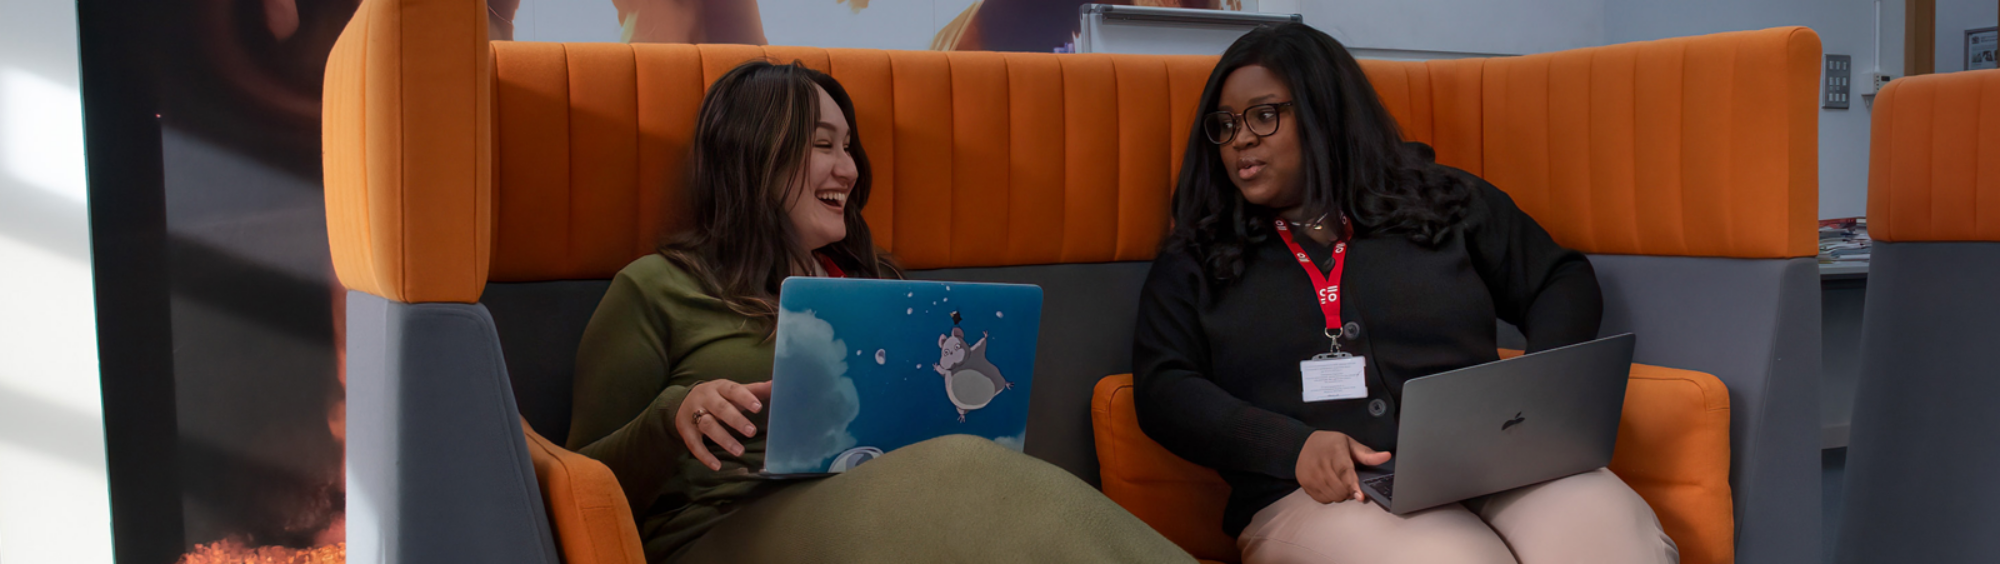 Two students with laptops sit on an orange sofa as they talk to each other.